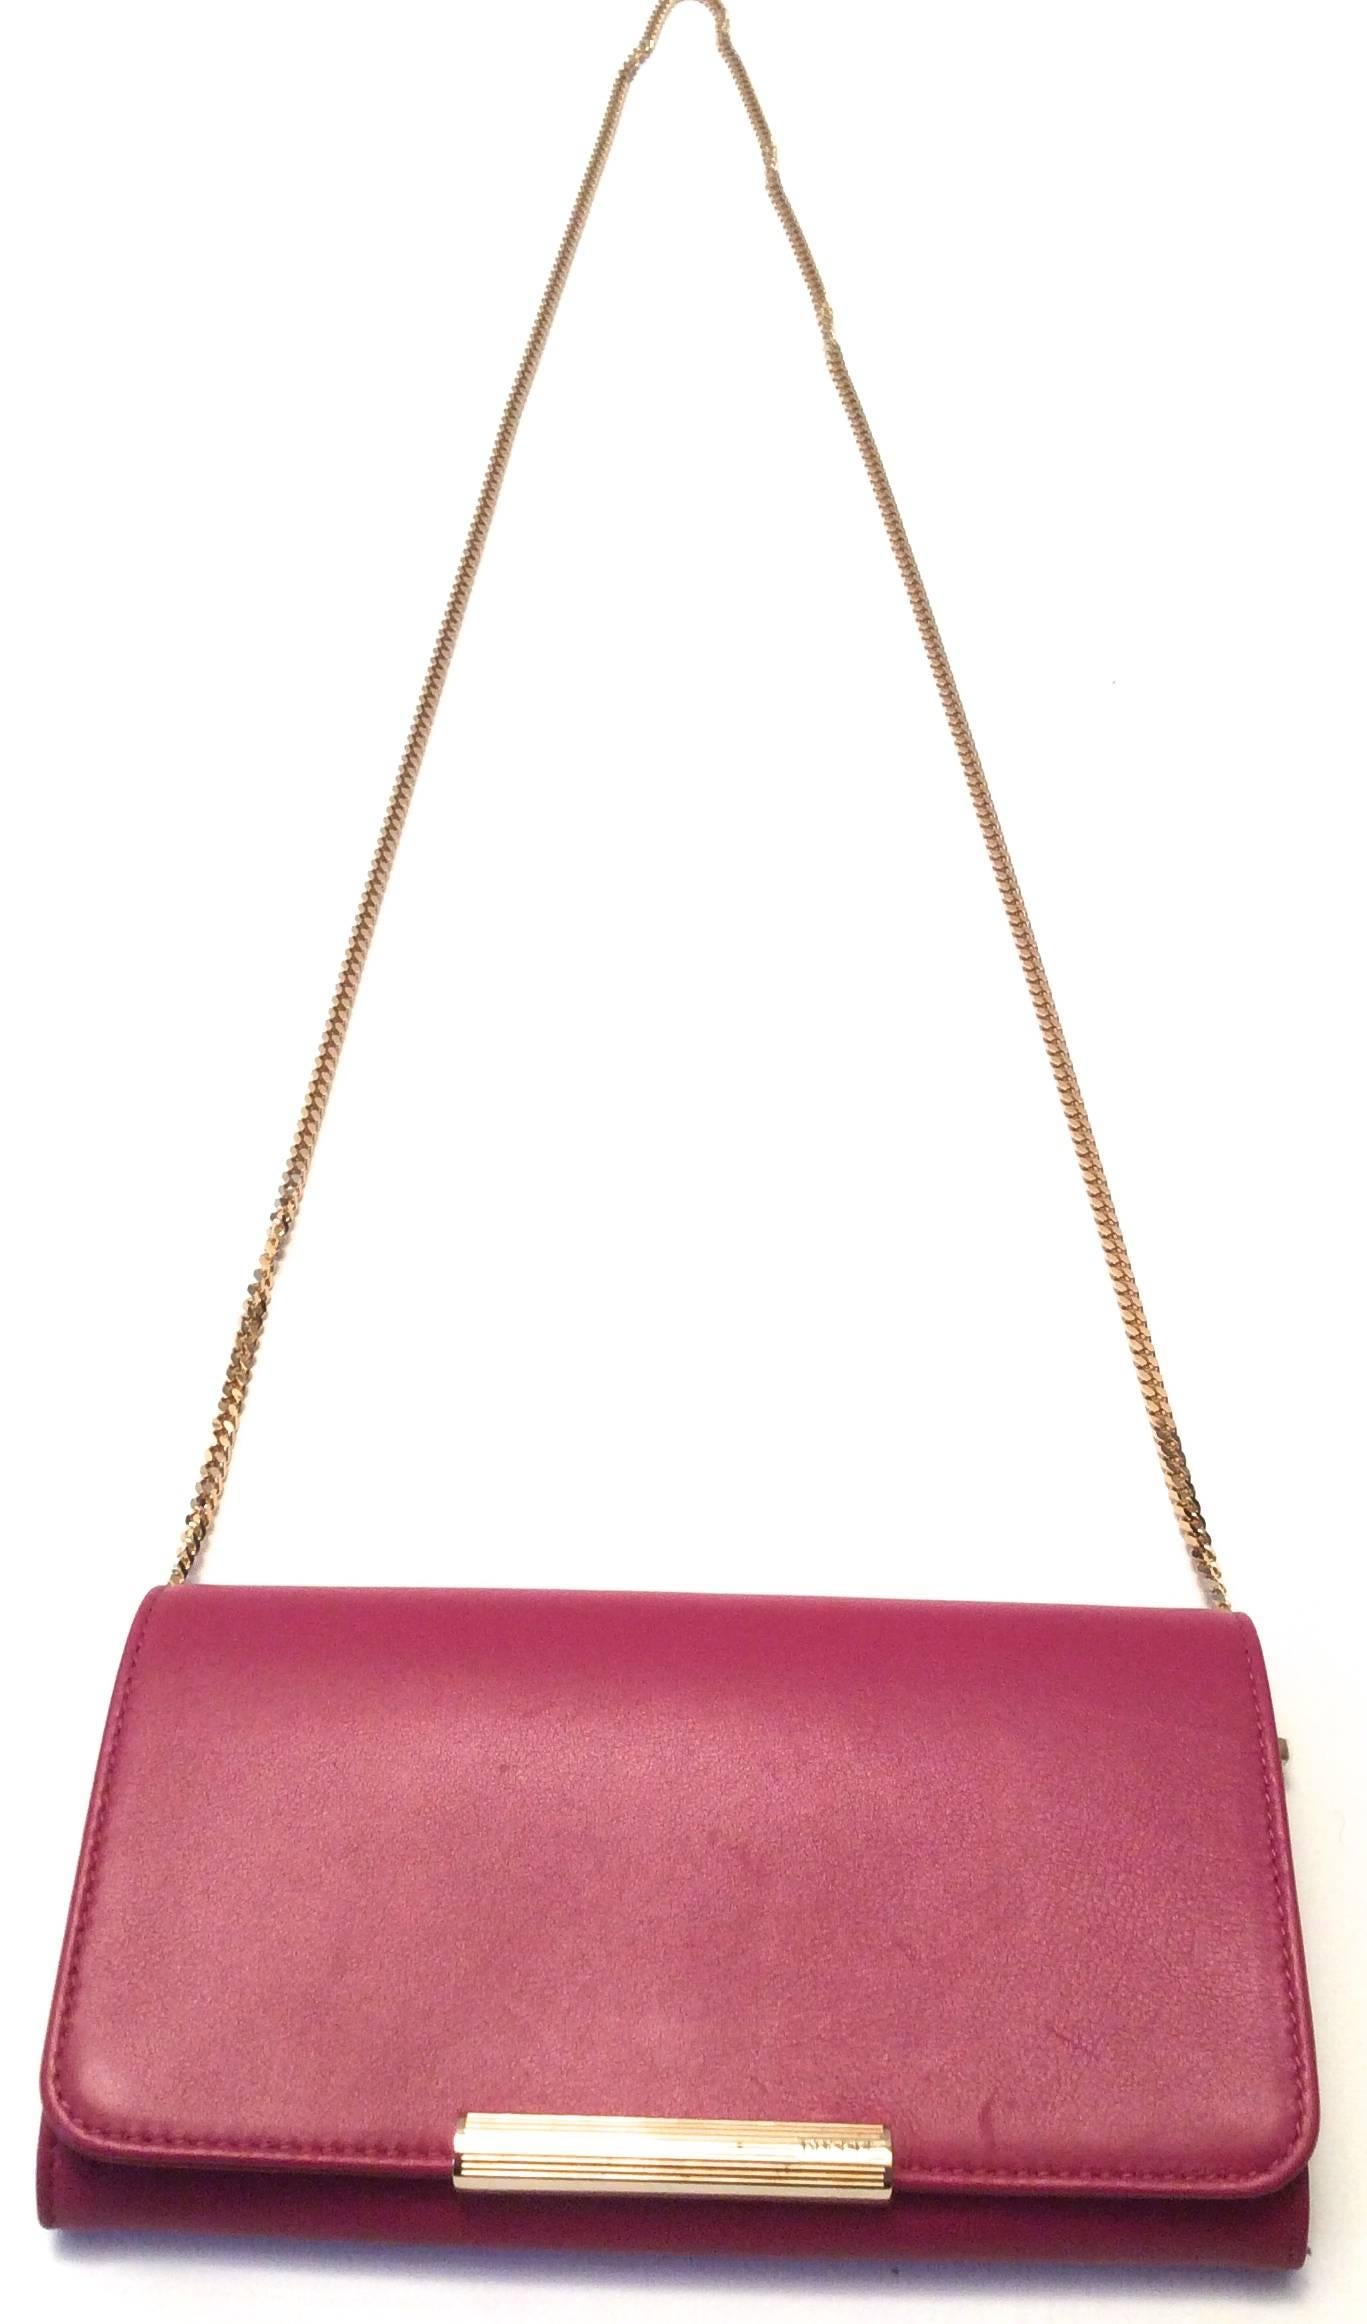 This beautiful Pucci Wallet-on-a-chain is a fabulous fuchsia leather with a beautiful gold tone snap enclosure with Pucci written out on the bottom right. When you open the beautiful bag, the lining is beautiful orange, lavender, and fuchsia